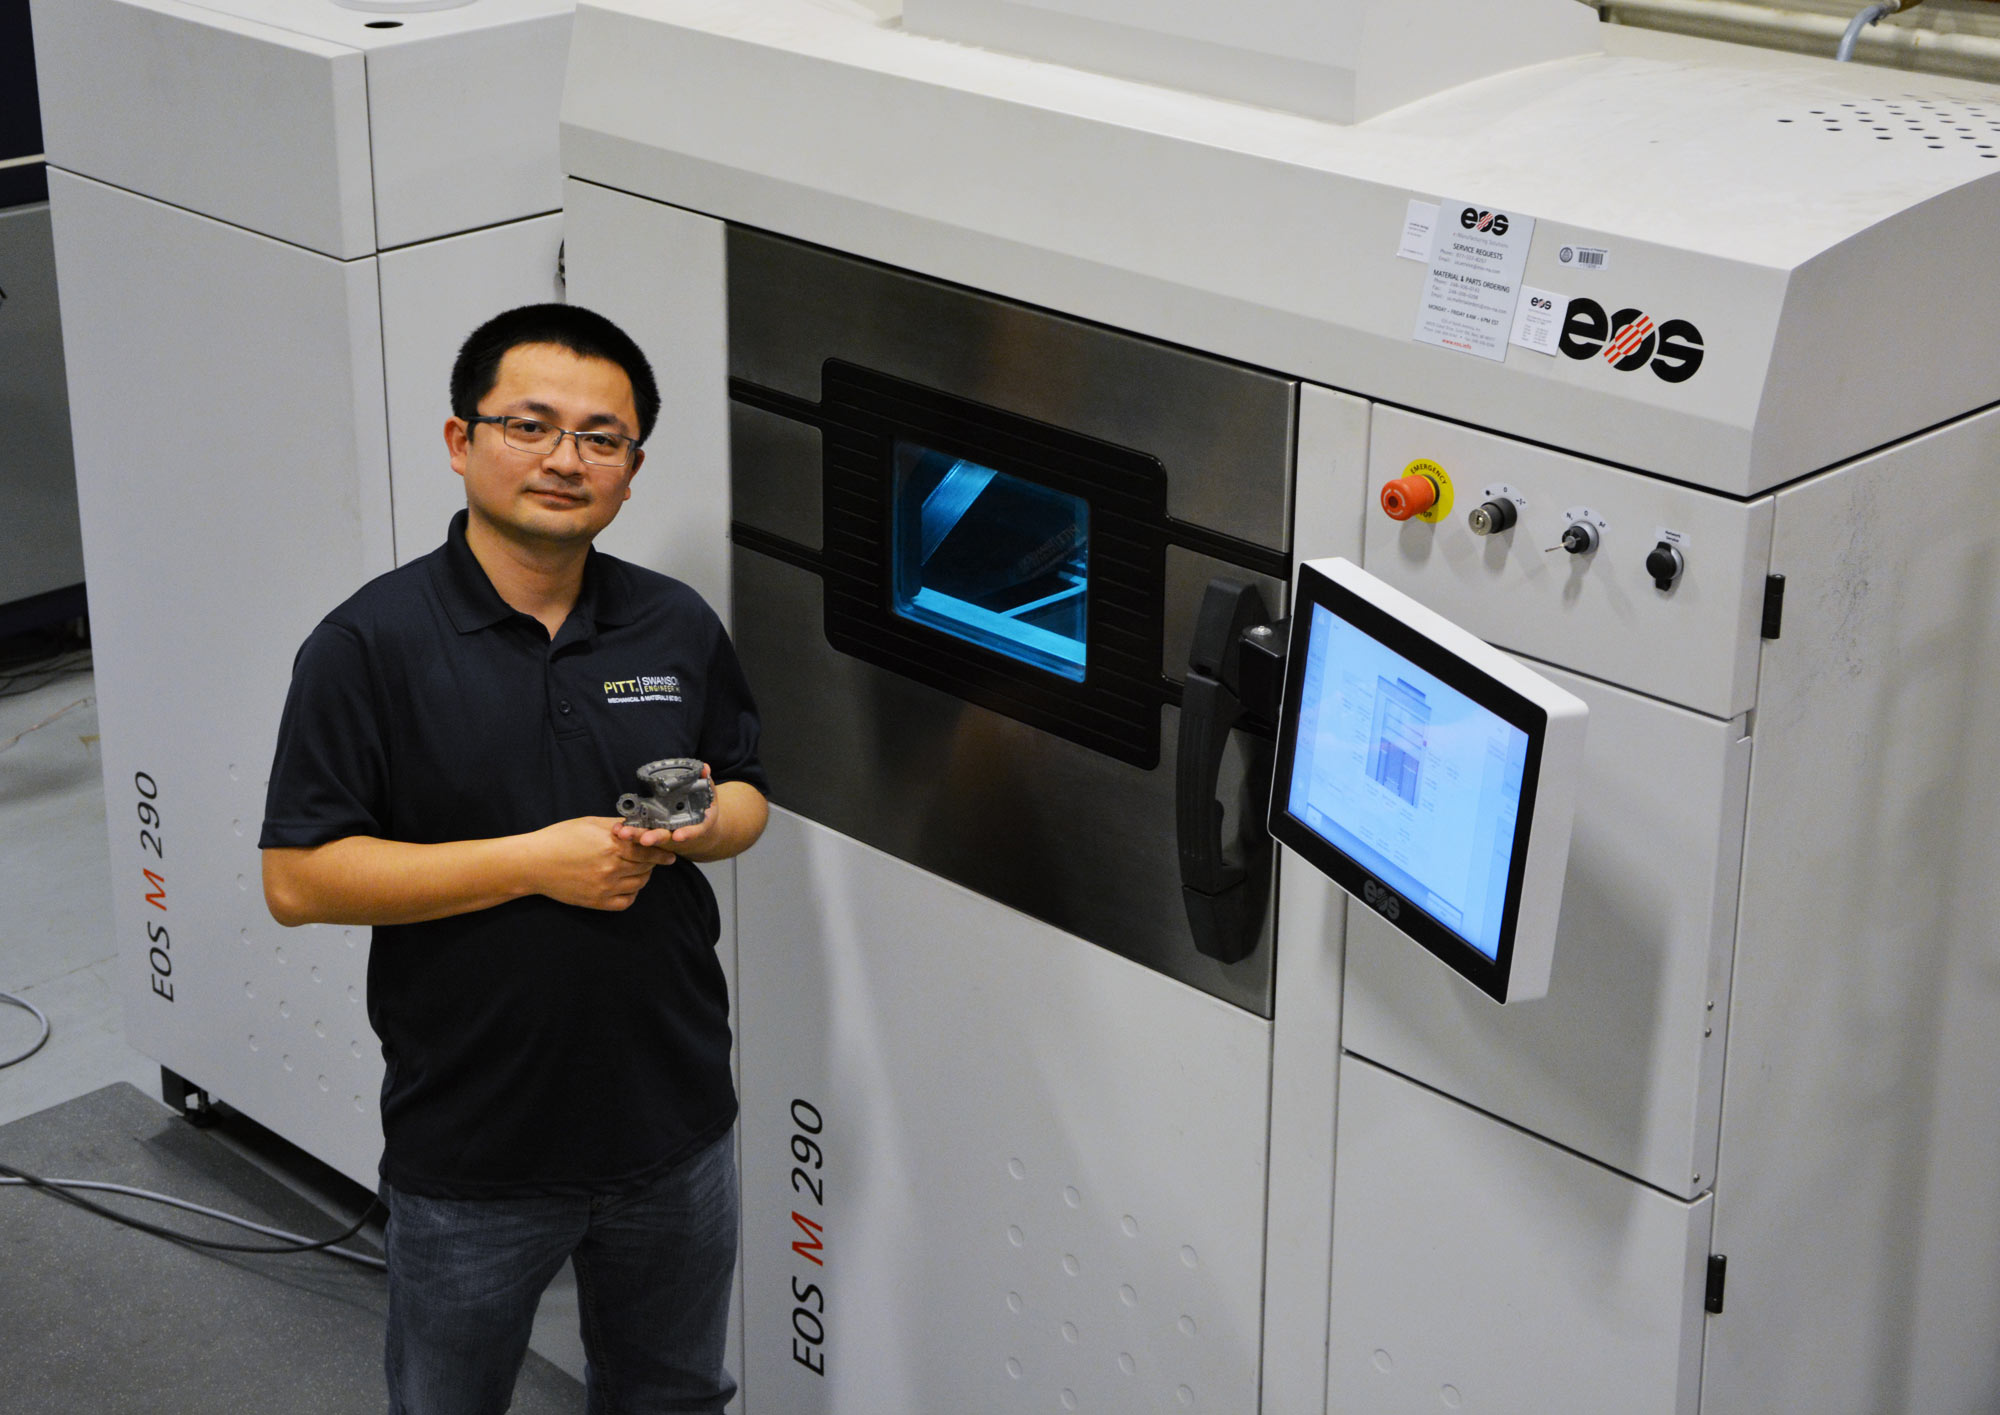 Wei Xiong, assistant professor of mechanical engineering and materials science at the University of Pittsburgh Swanson School of Engineering, received a $526,334 Faculty Early Career Development (CAREER) Award from the National Science Foundation (NSF) for his work in additive manufacturing.